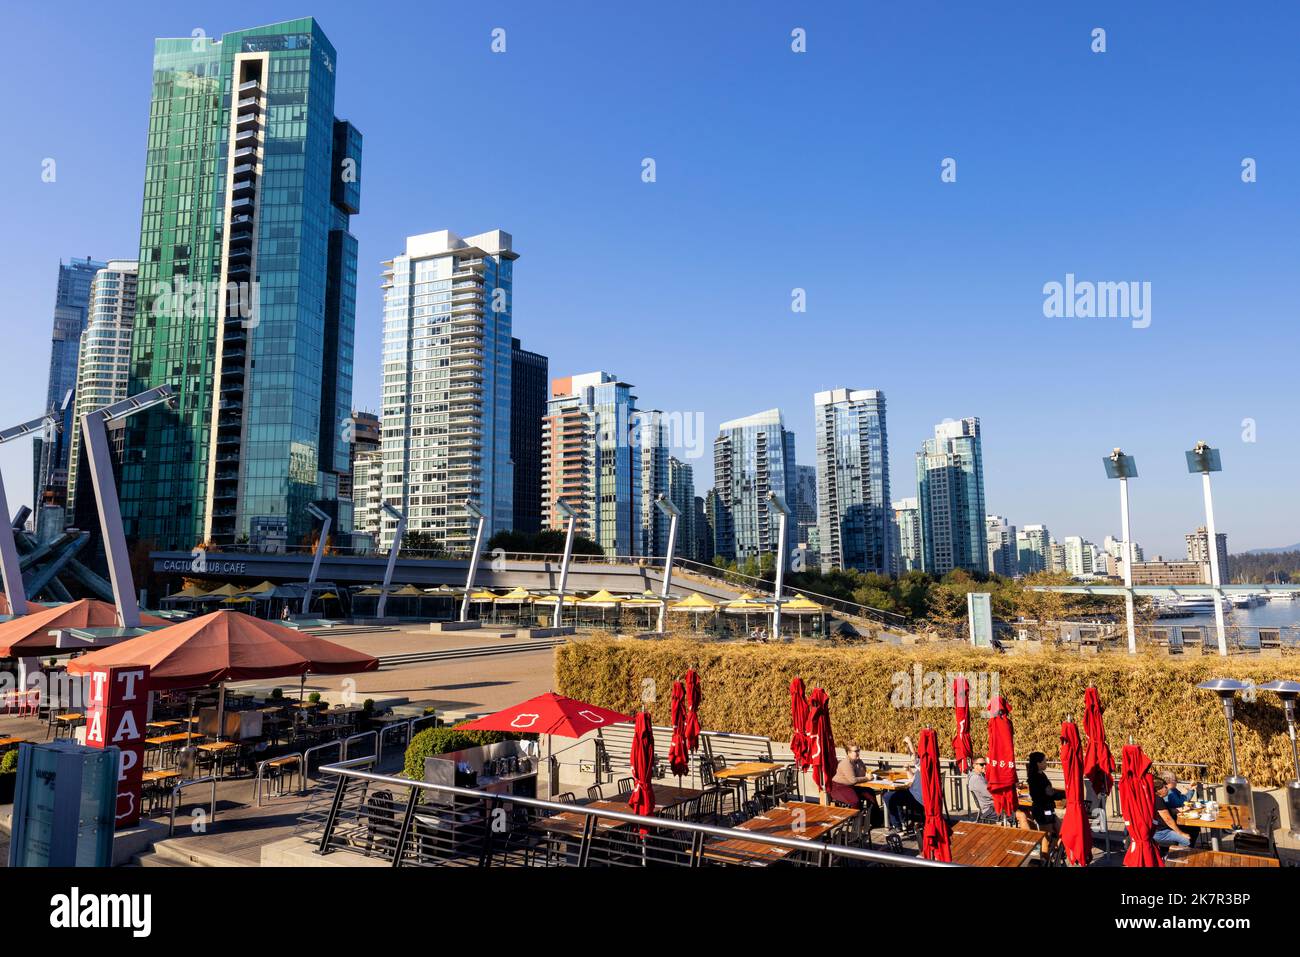 Commercial and residentail buildings in Coal Harbour neighborhood - Vancouver, British Columbia, Canada Stock Photo